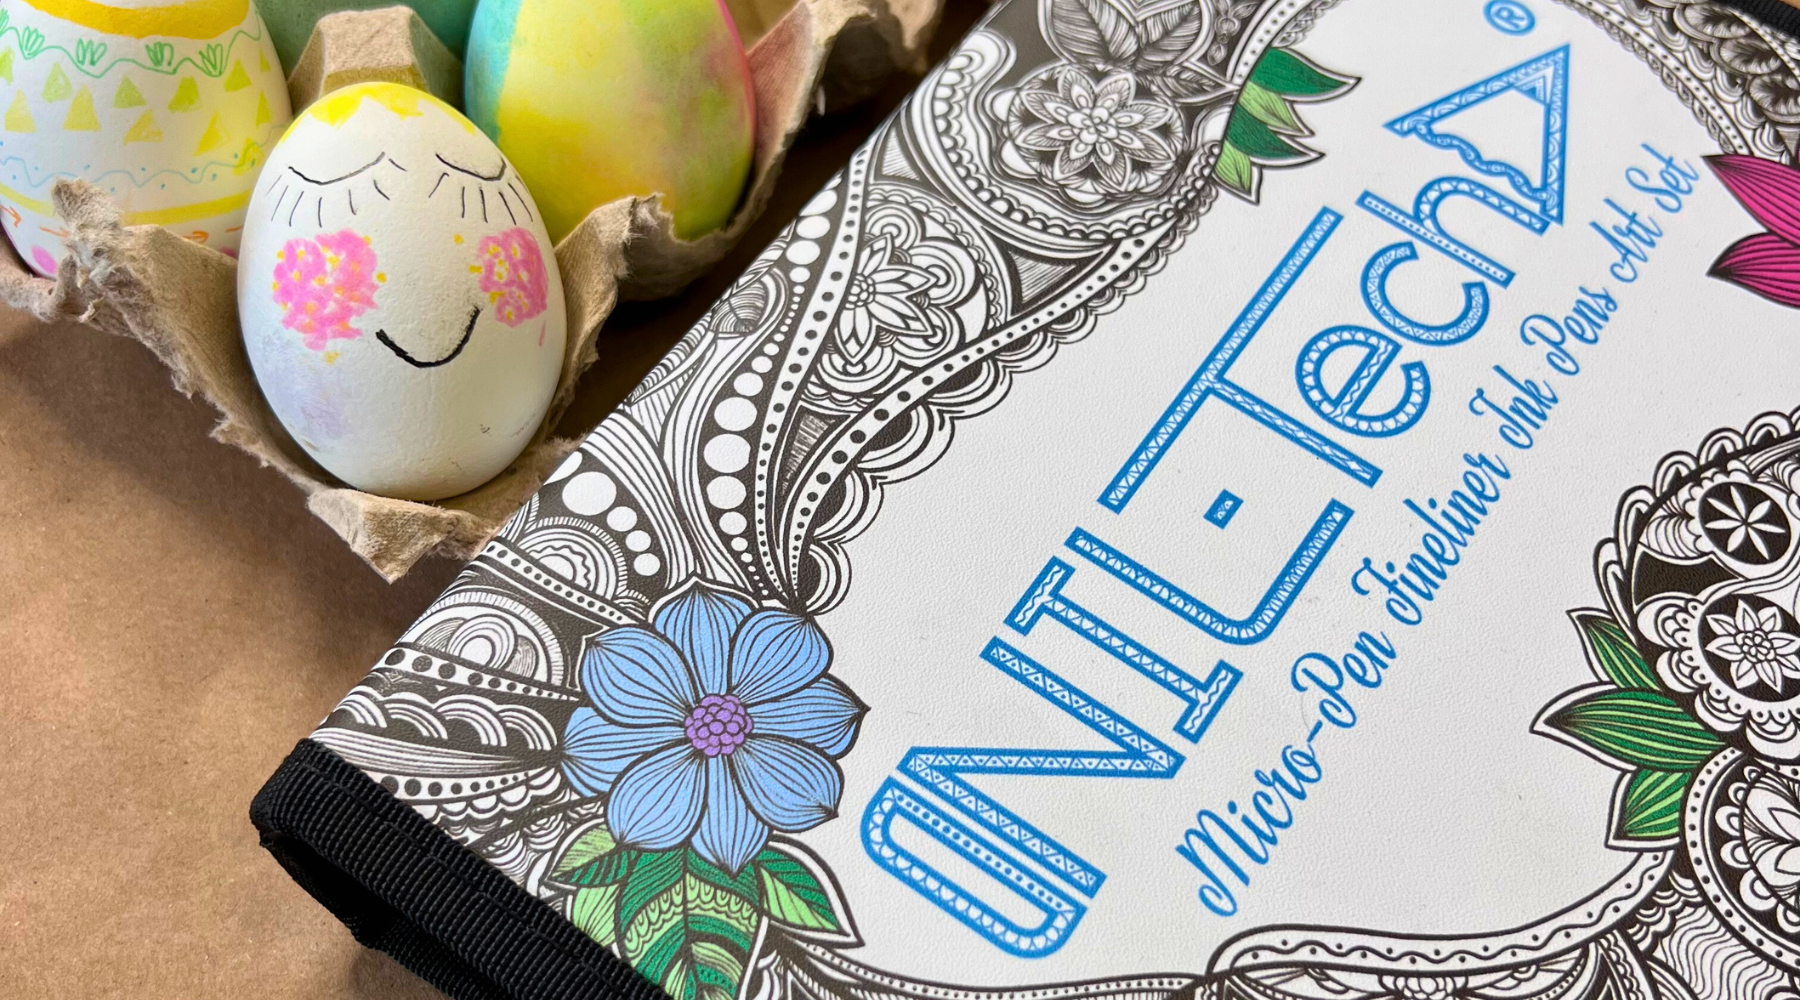 Colorful tie-dye Easter eggs decorated with intricate doodles using brush pens on a crafting table